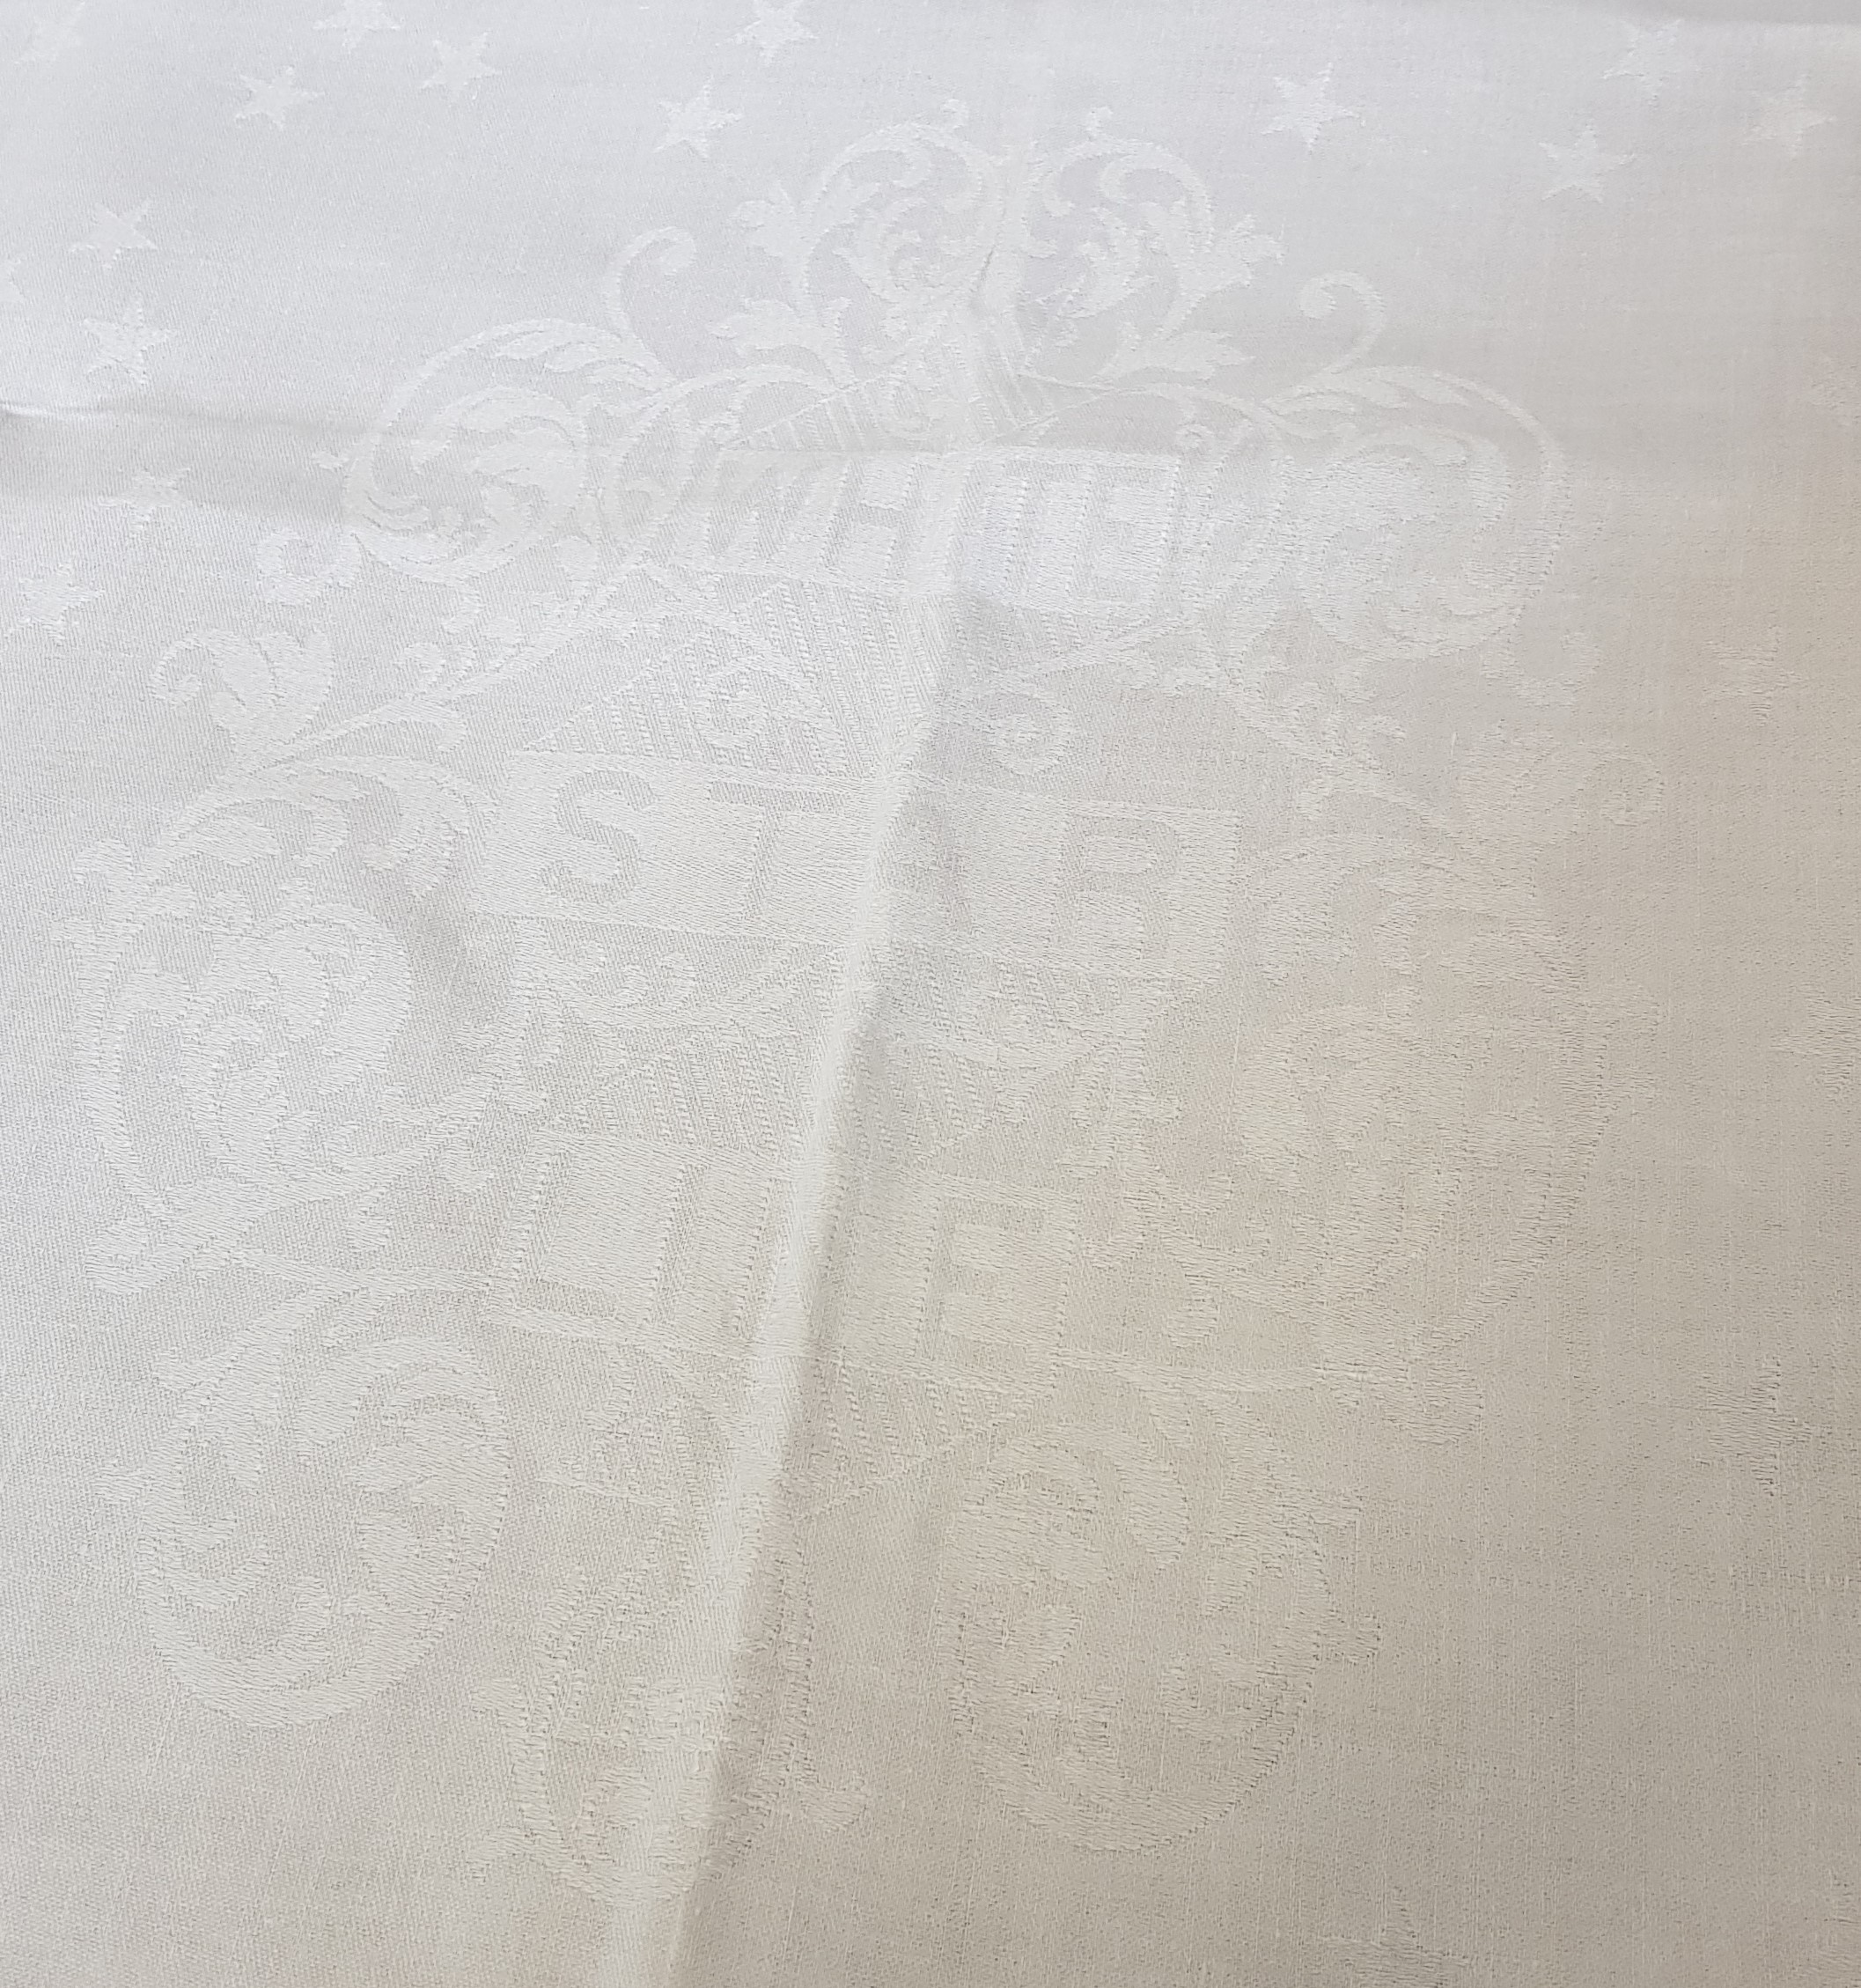 WHITE STAR LINE TABLE CLOTH (68''X 55'' APPROX) - Image 2 of 3